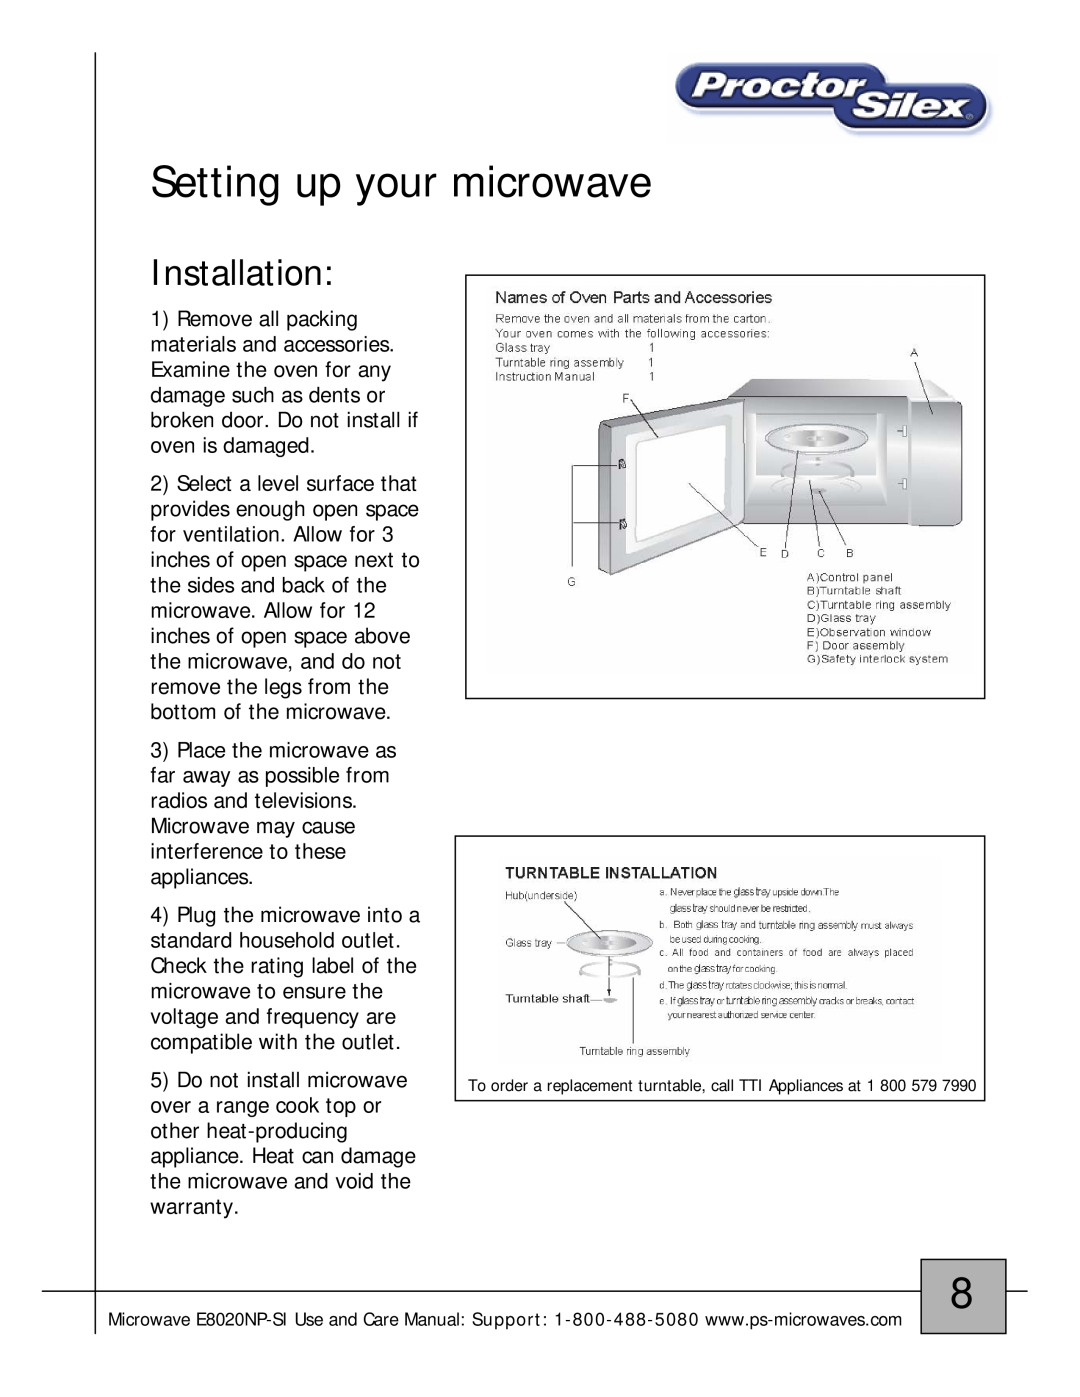 Proctor-Silex E8020NP-SI owner manual Setting up your microwave, Installation 